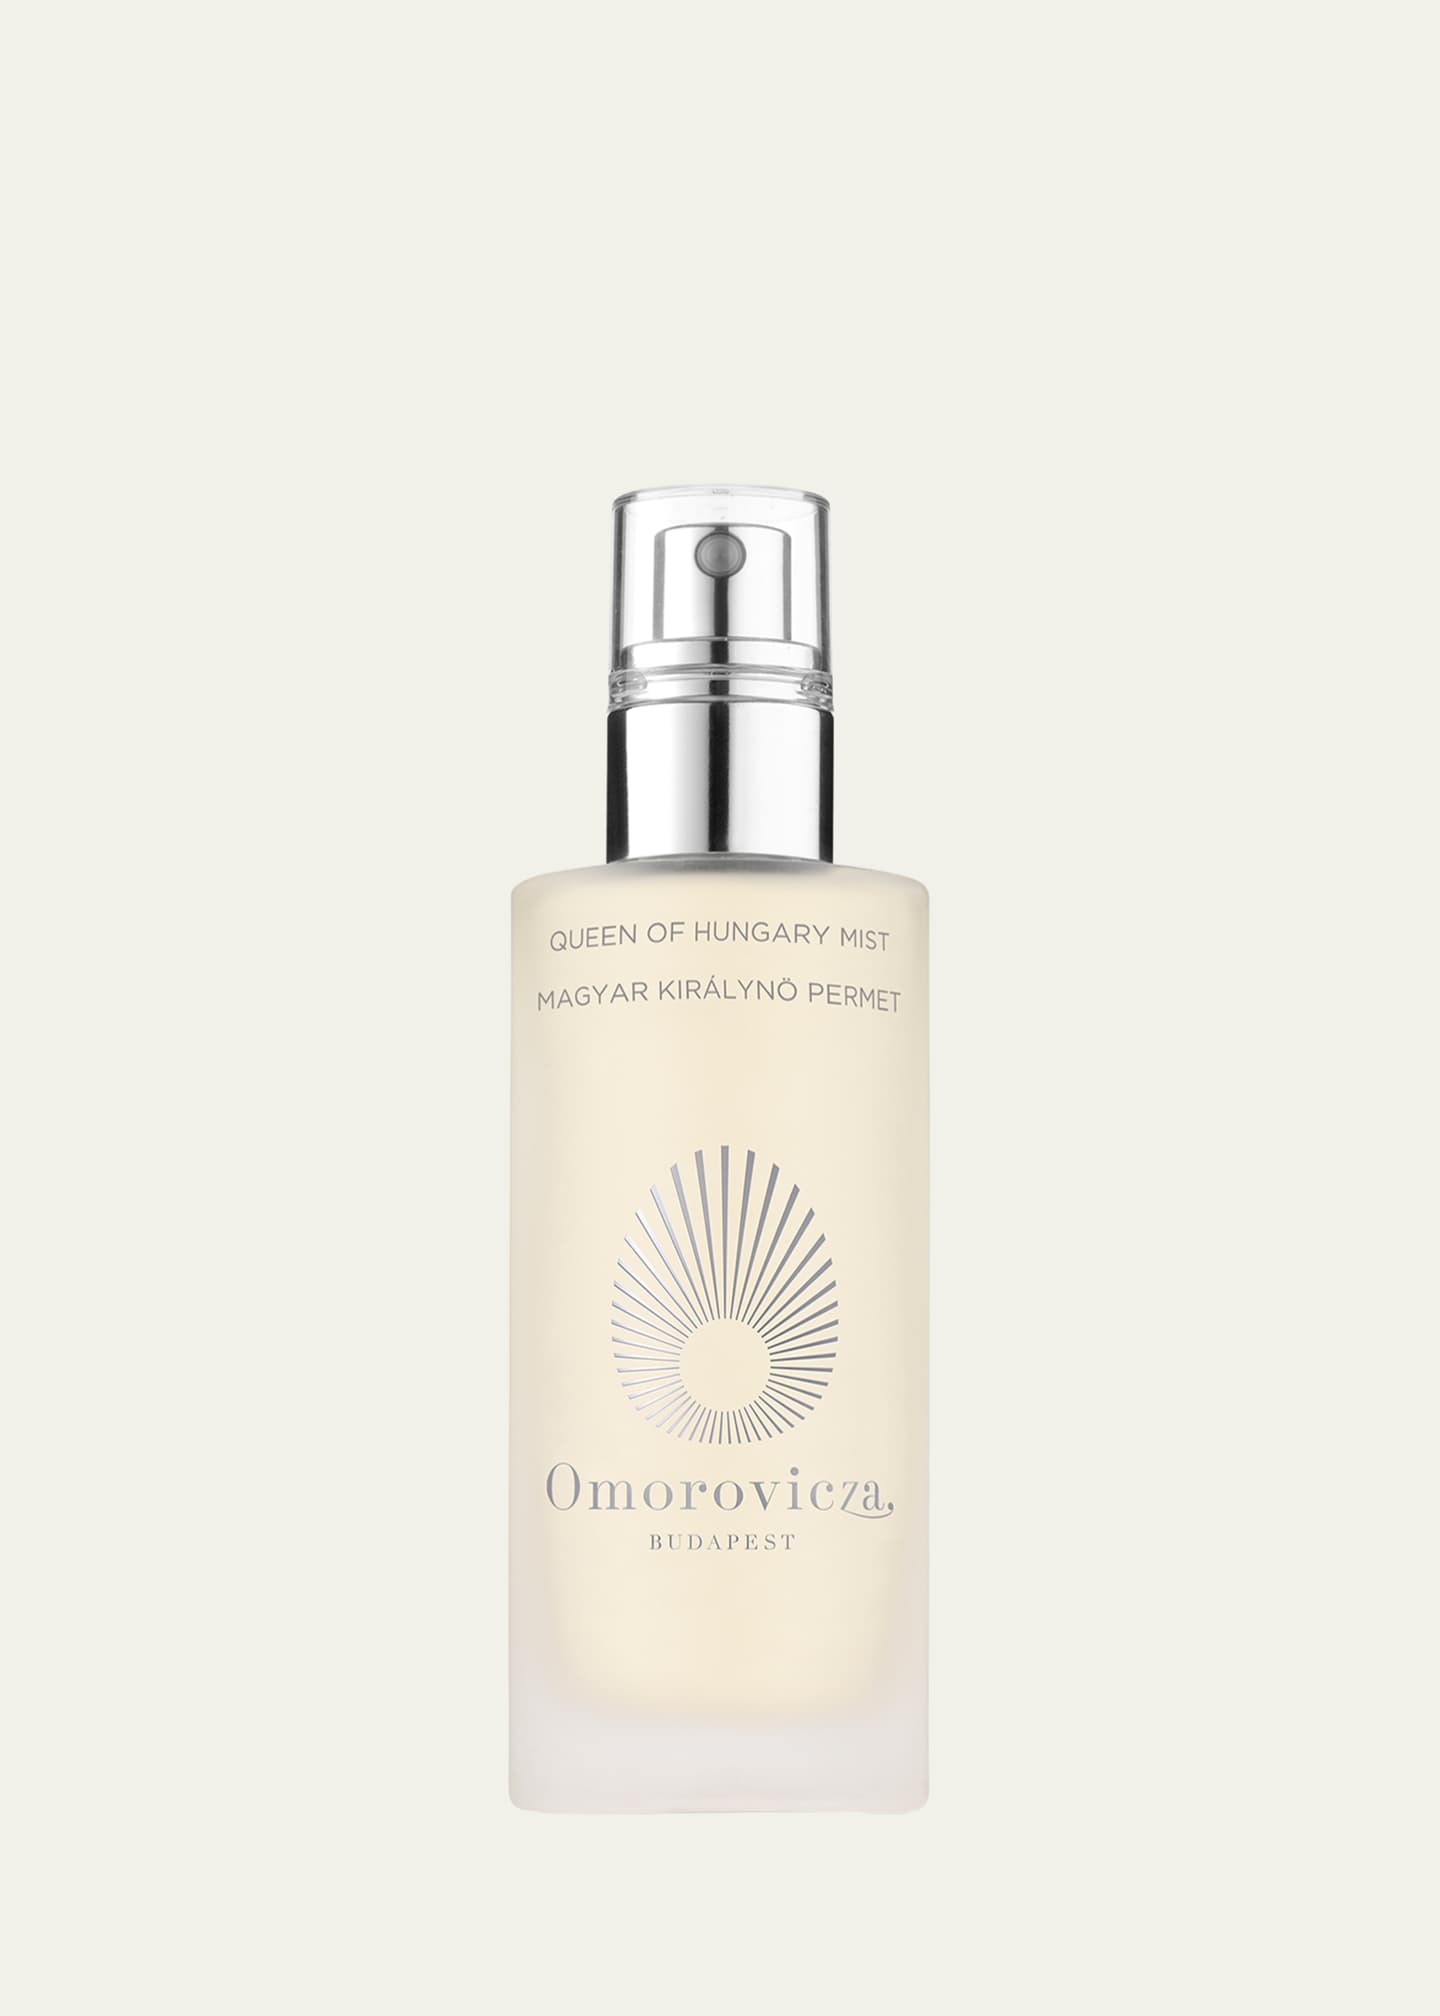 Omorovicza Queen of Hungary Mist, 3.4 oz. Image 1 of 4